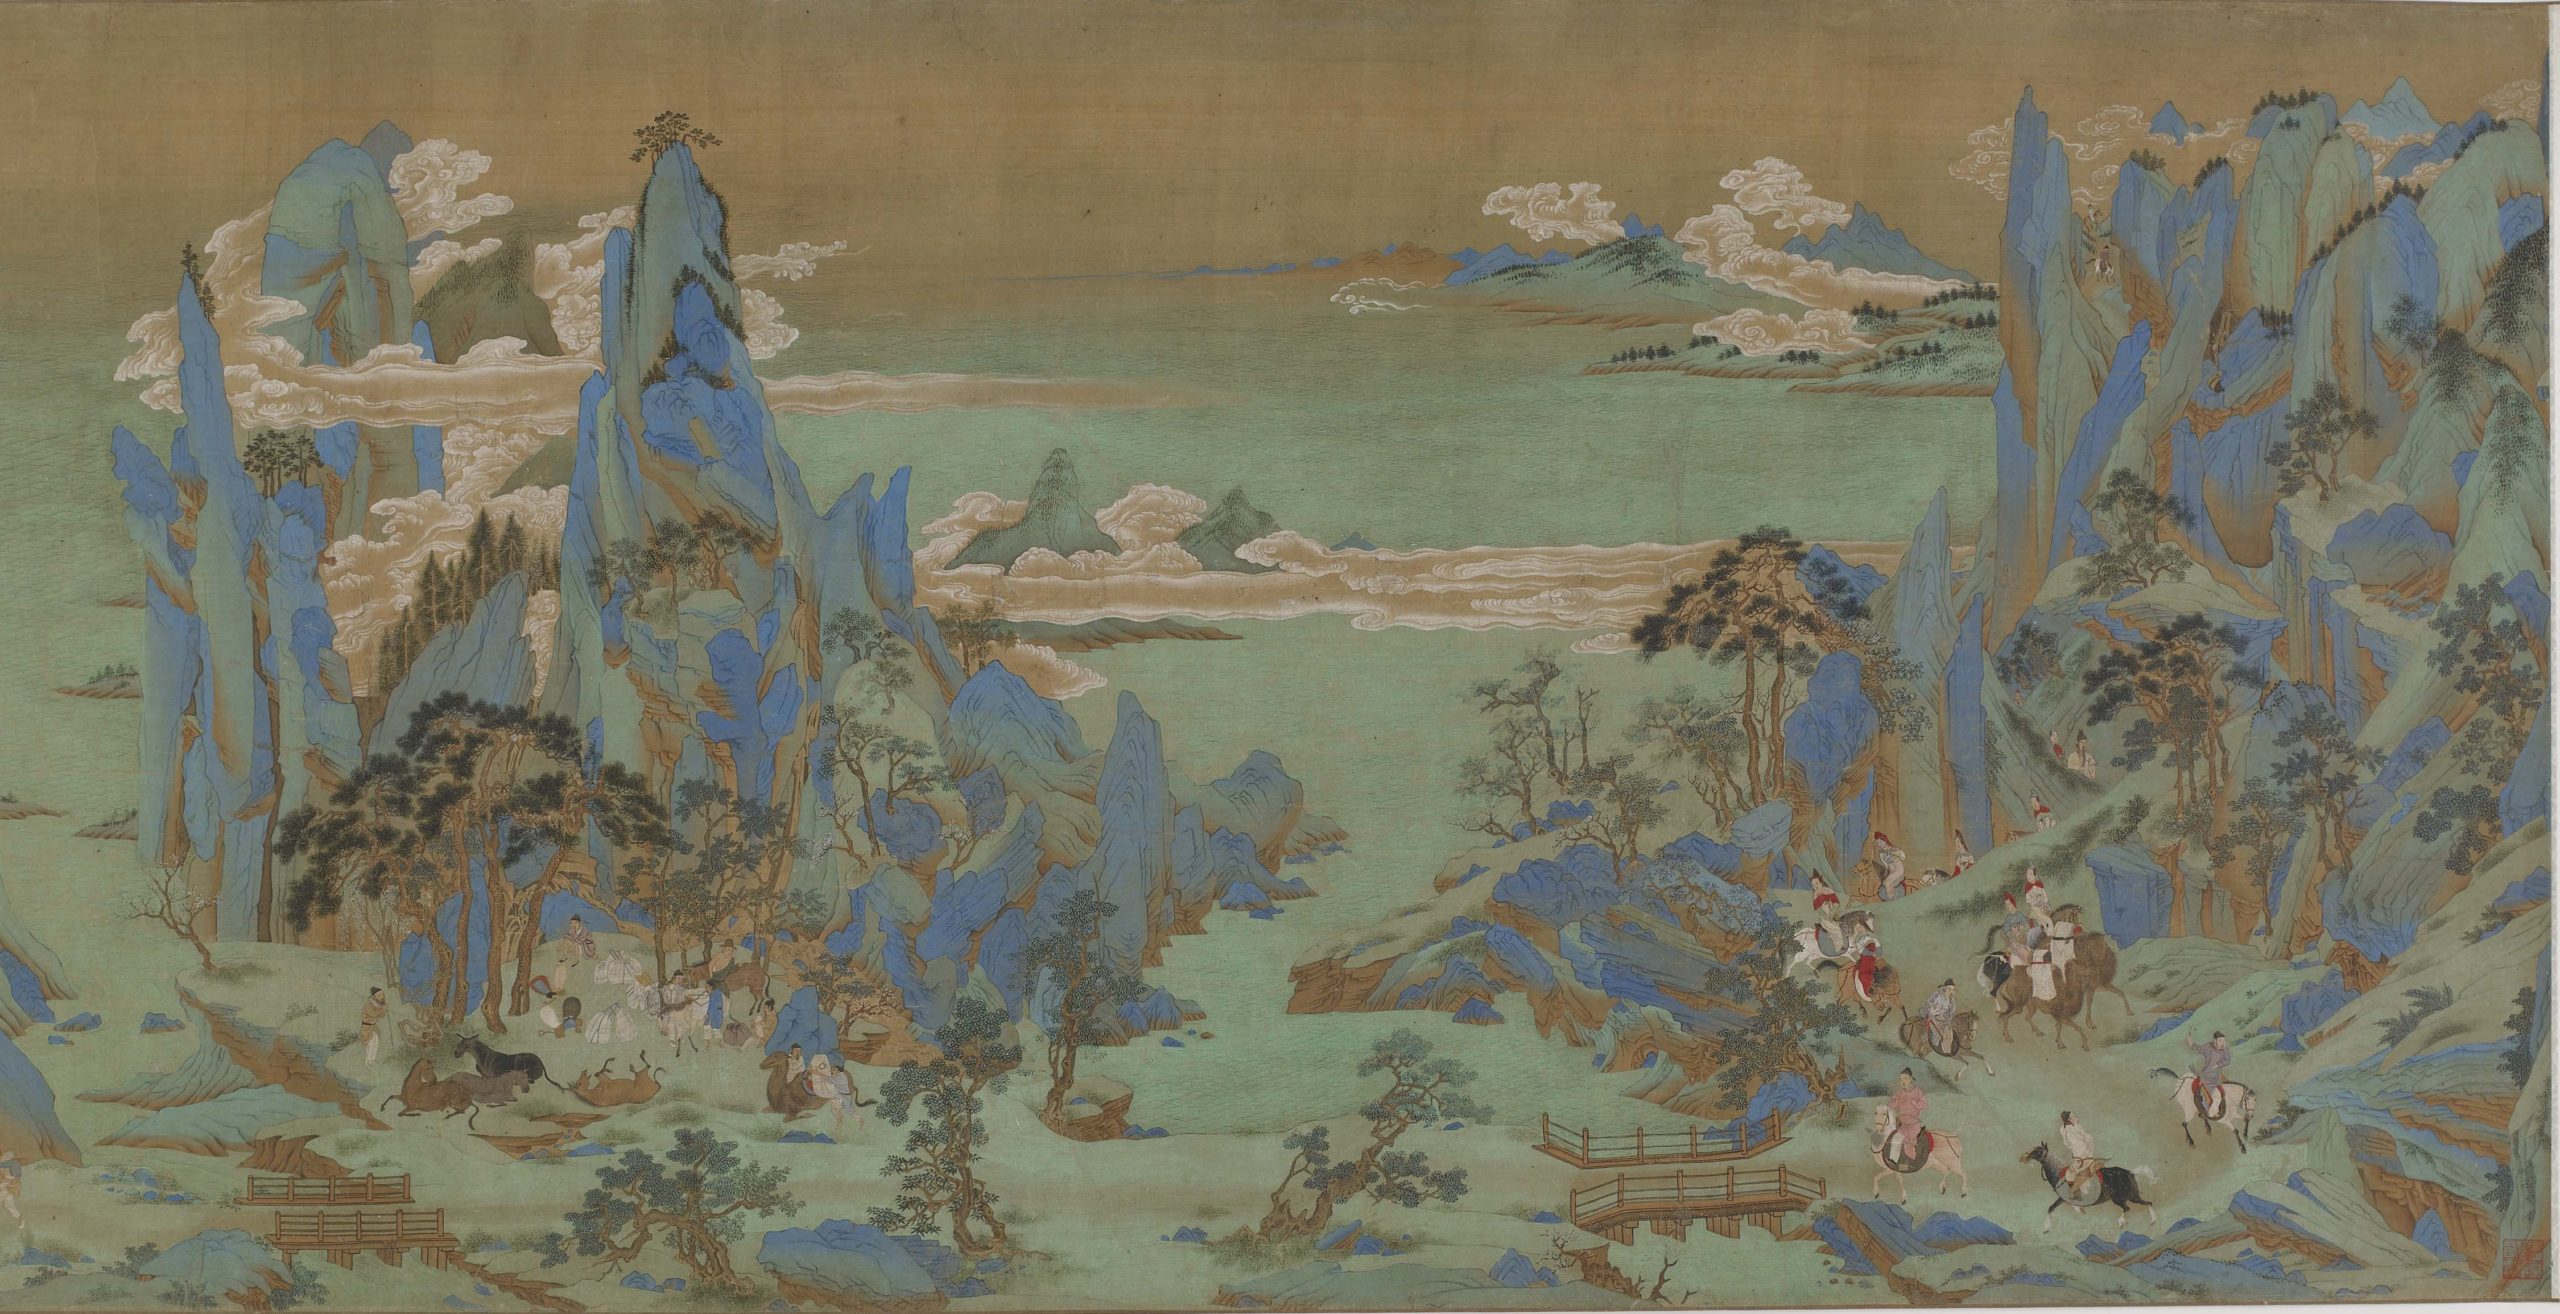 Traditionally attributed to Qiu Ying 仇英 (ca. 1494-1552), calligrapher: Wen Zhengming 文徵明 (1470-1559), Journey to Shu (detail), Ming dynasty, 16th-17th century, ink and color on silk, blue-and-green style, China, 54.9 x 183.2 cm (Freer Gallery of Art, Smithsonian Institution, Washington, DC: Purchase — funds provided by the B.Y. Lam Foundation Fund, F1993.4)